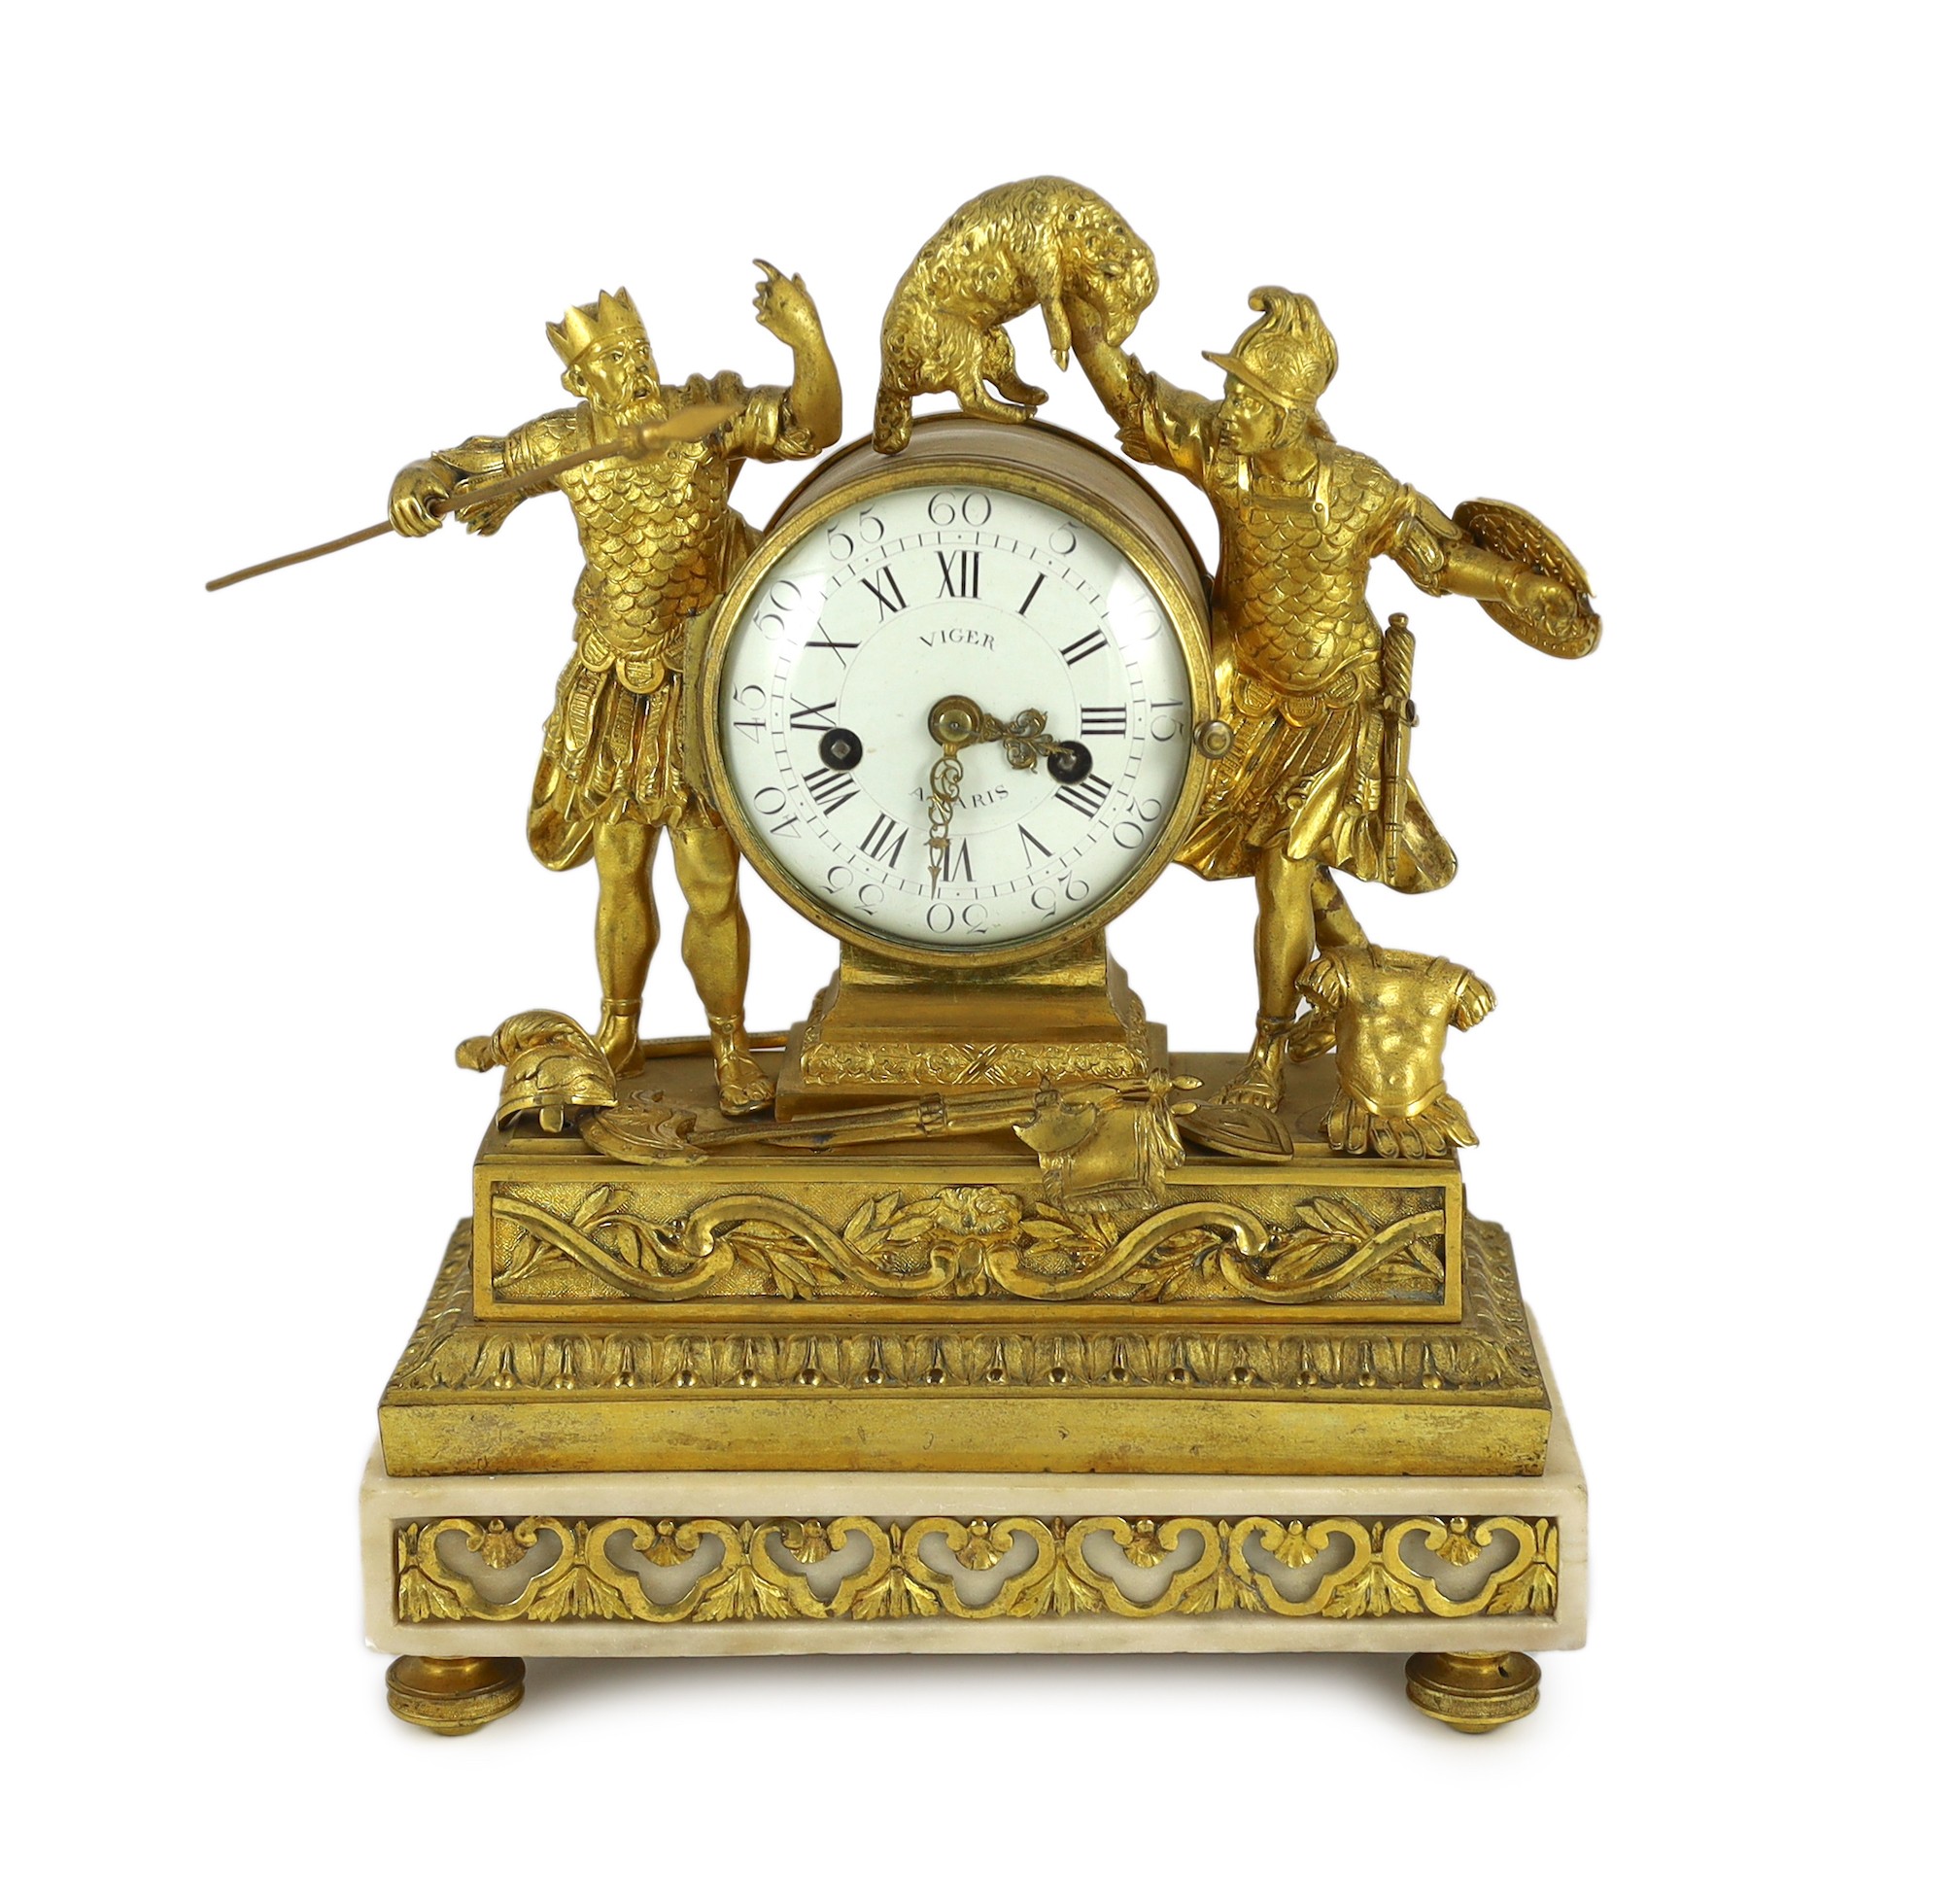 Viger à Paris. An early 19th century French ormolu mantel clock, surmounted with figures of a King